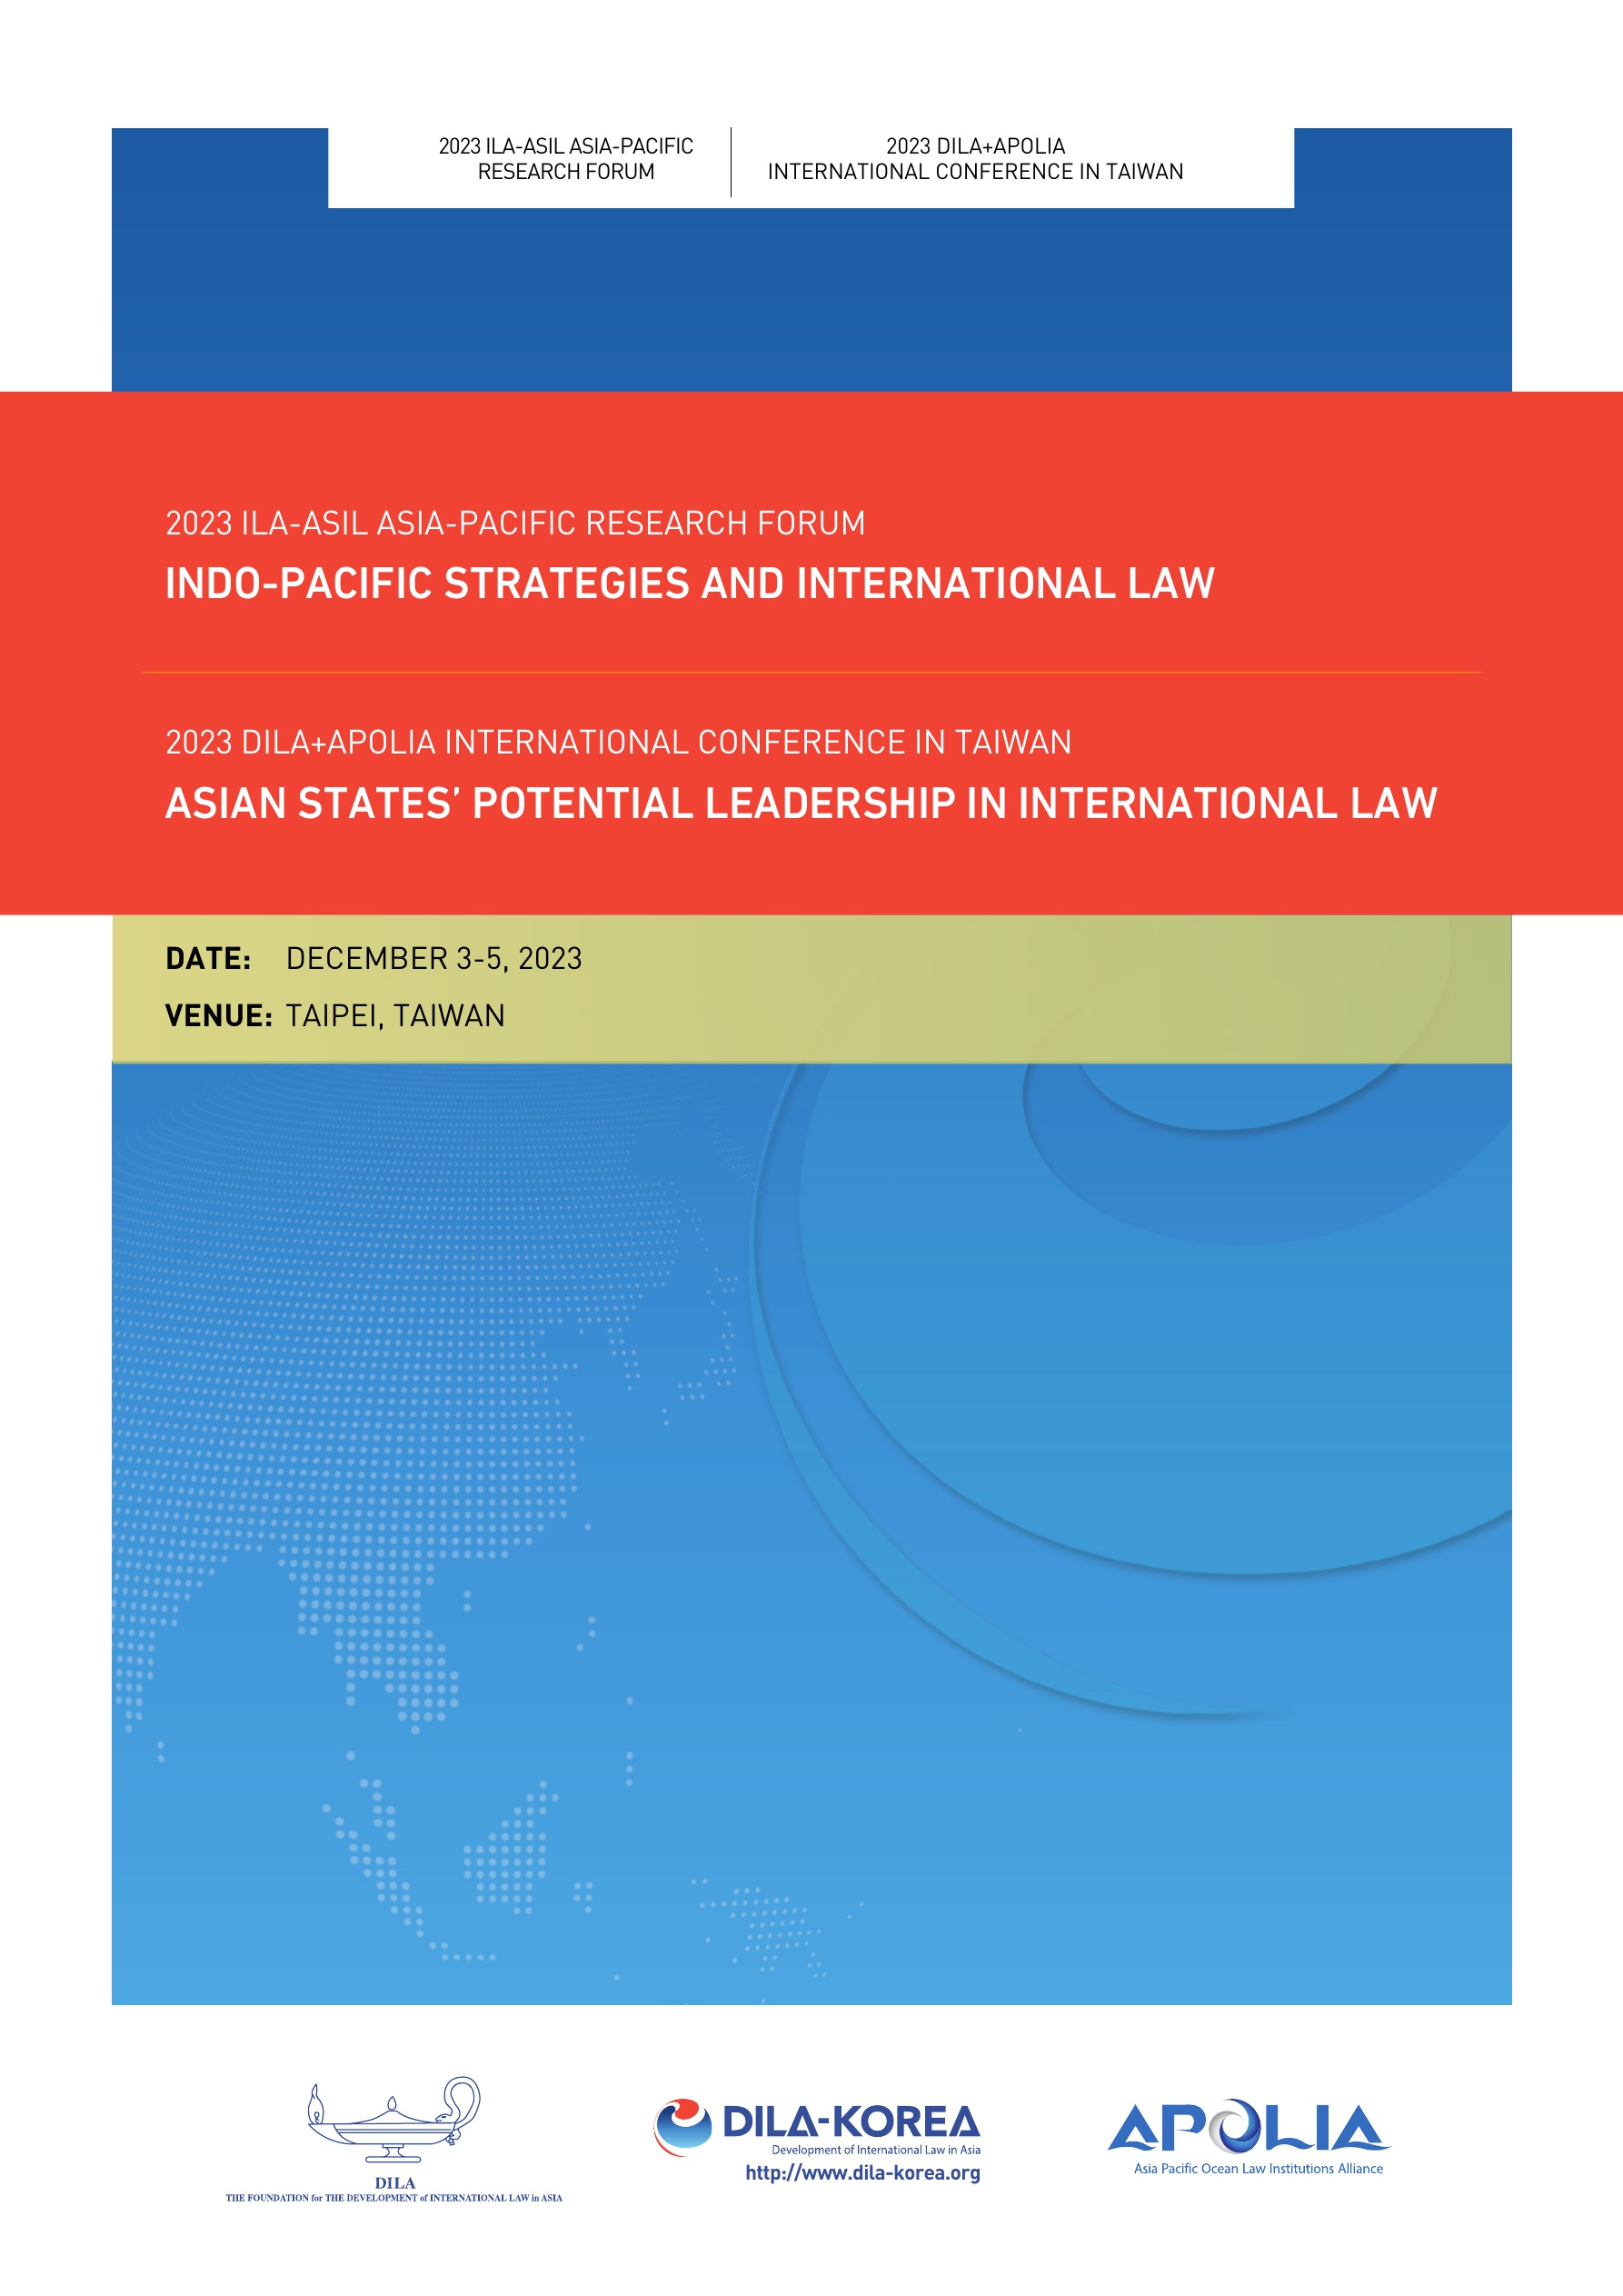 [Inha CIS] Asian States’ Potential Leadership in International Law                                 썸네일